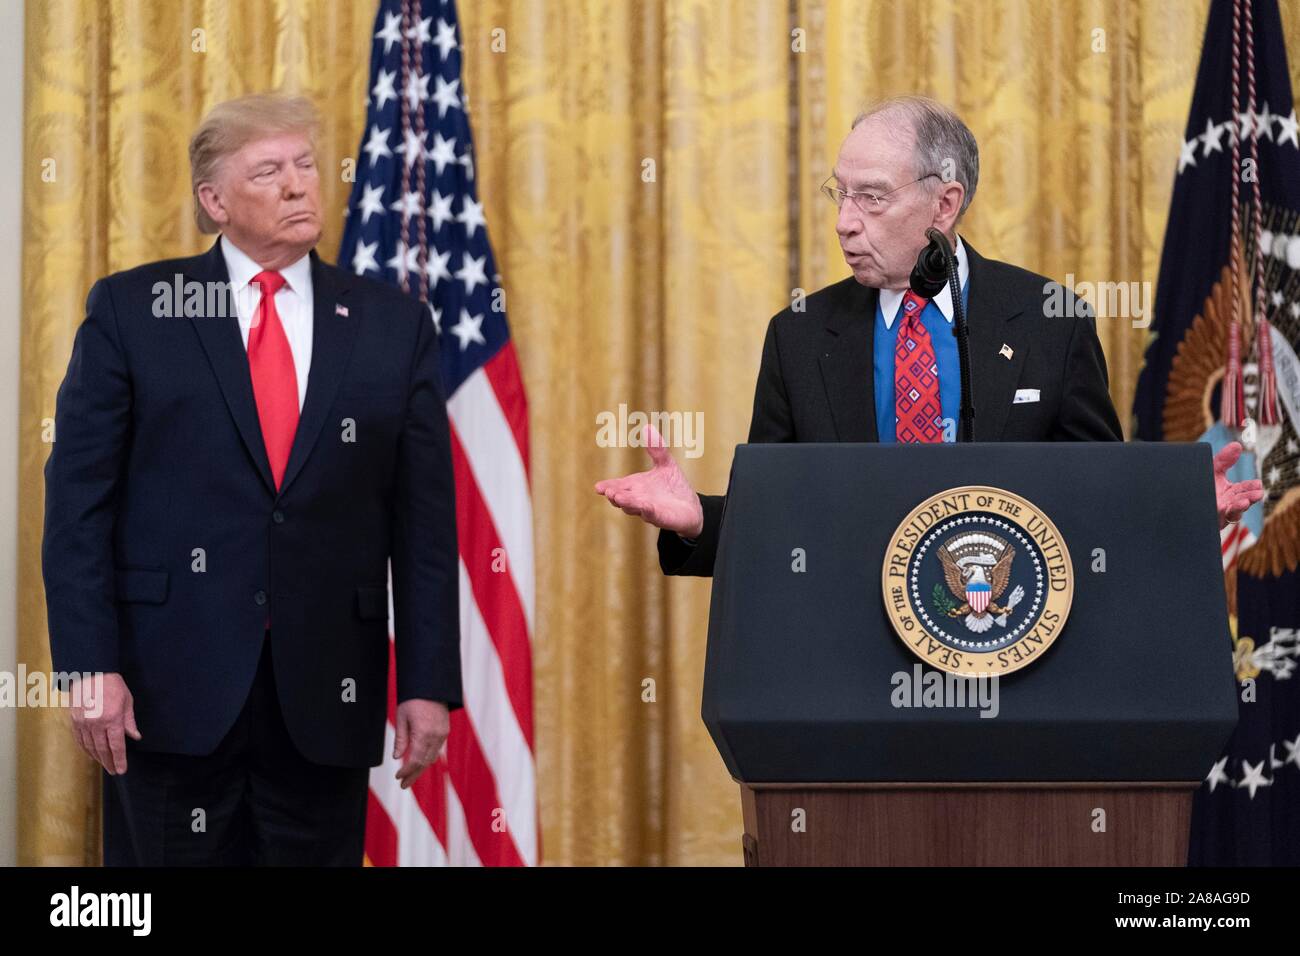 U.S. President Donald Trump listens as Senator Chuck Grassley delivers remarks on the federal judicial confirmation milestones in the East Room of the White House November 6, 2019 in Washington, DC. Stock Photo